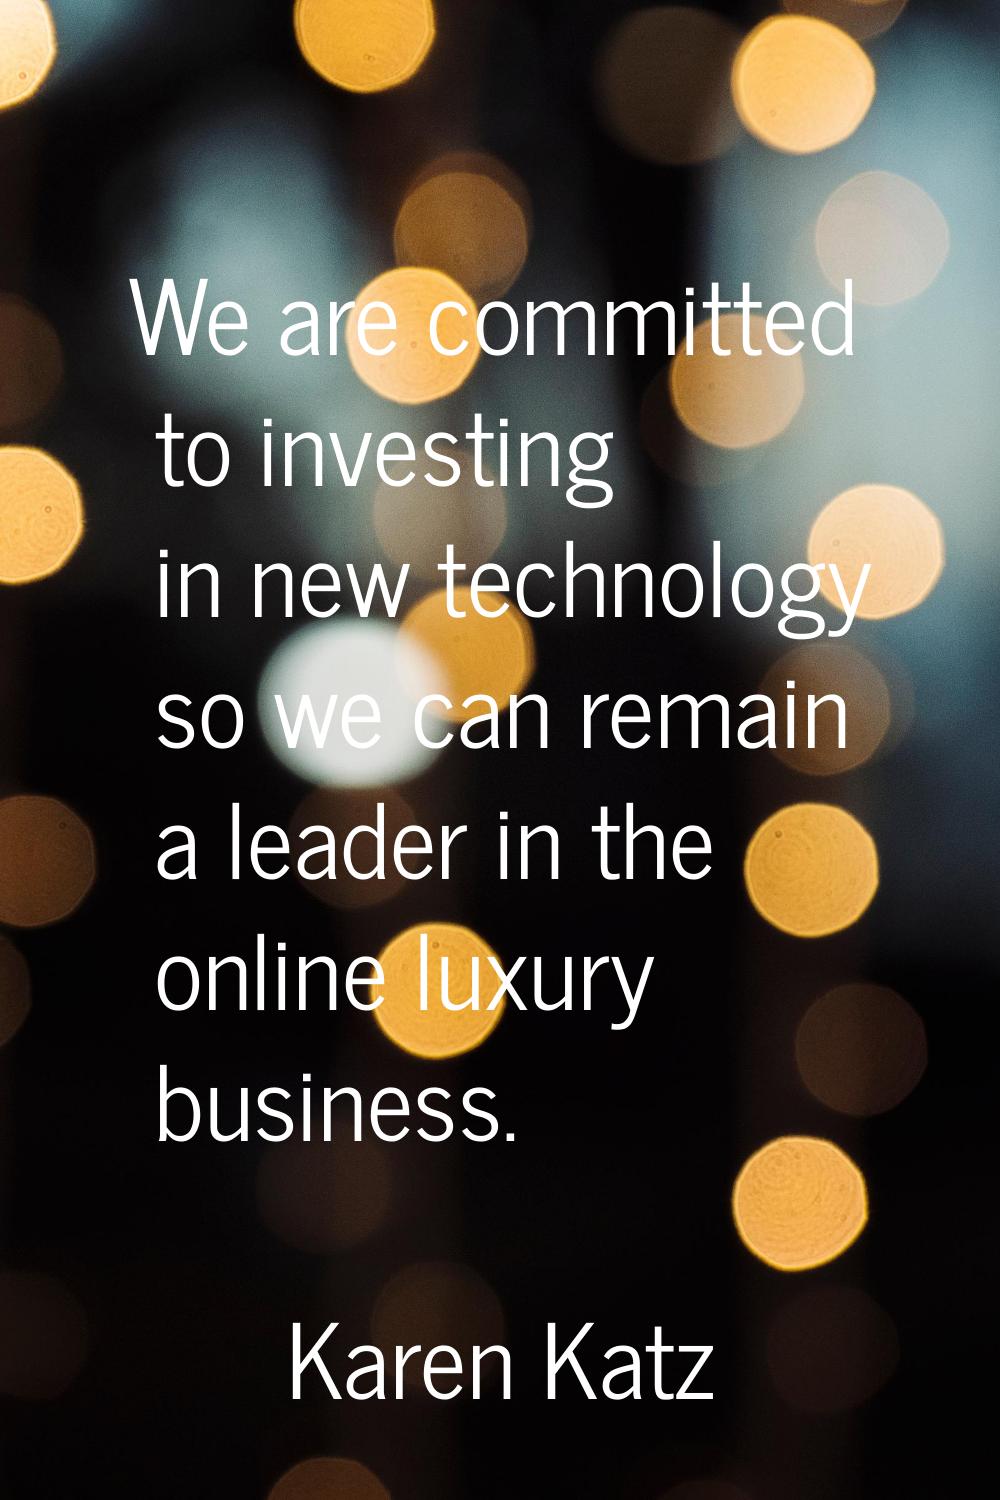 We are committed to investing in new technology so we can remain a leader in the online luxury busi